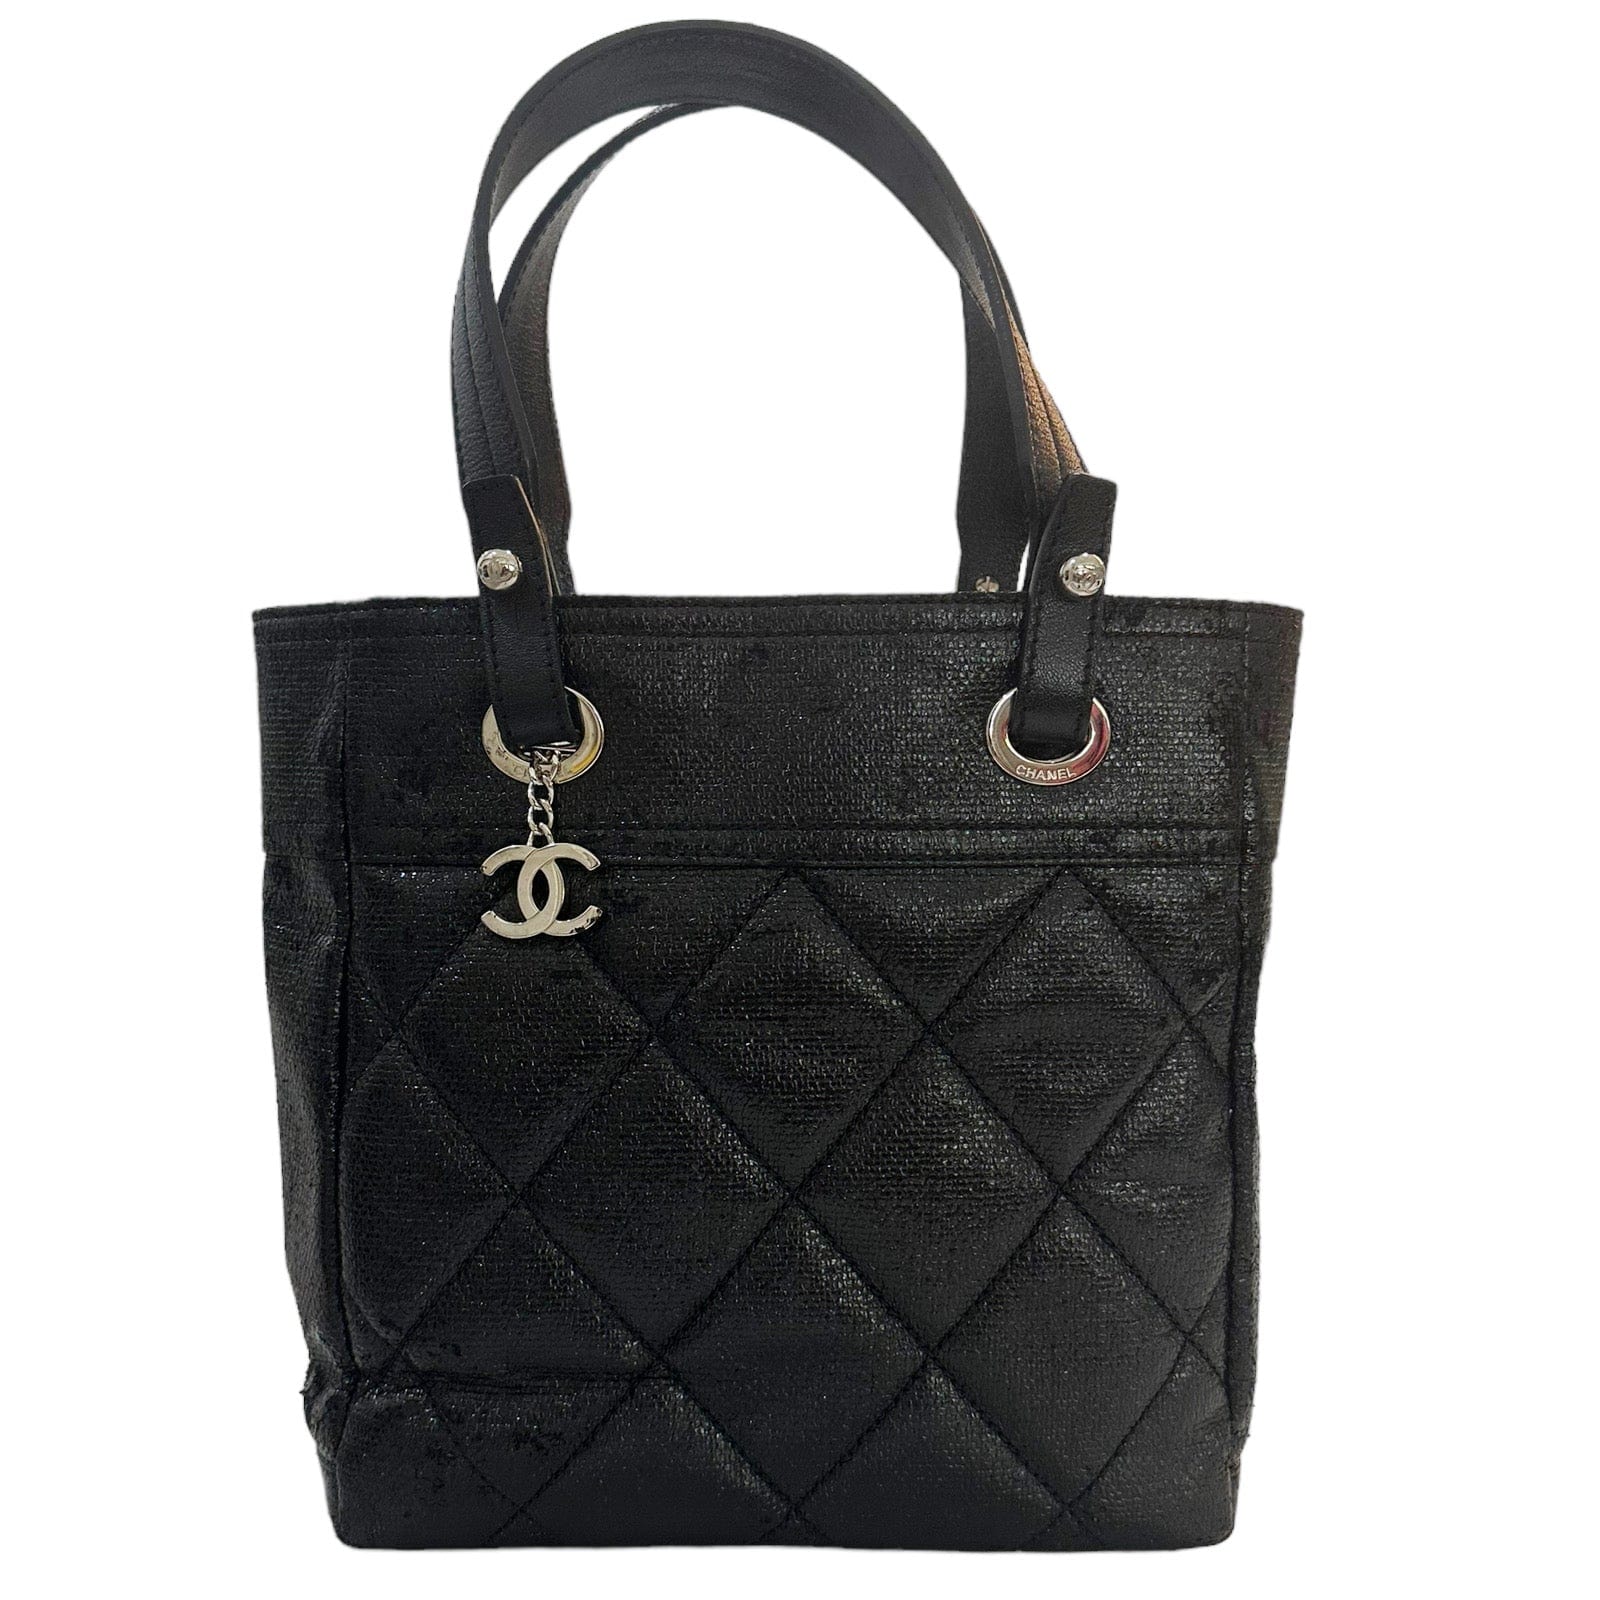 CHANEL Deauville Small Shopping Leather Tote Bag Black